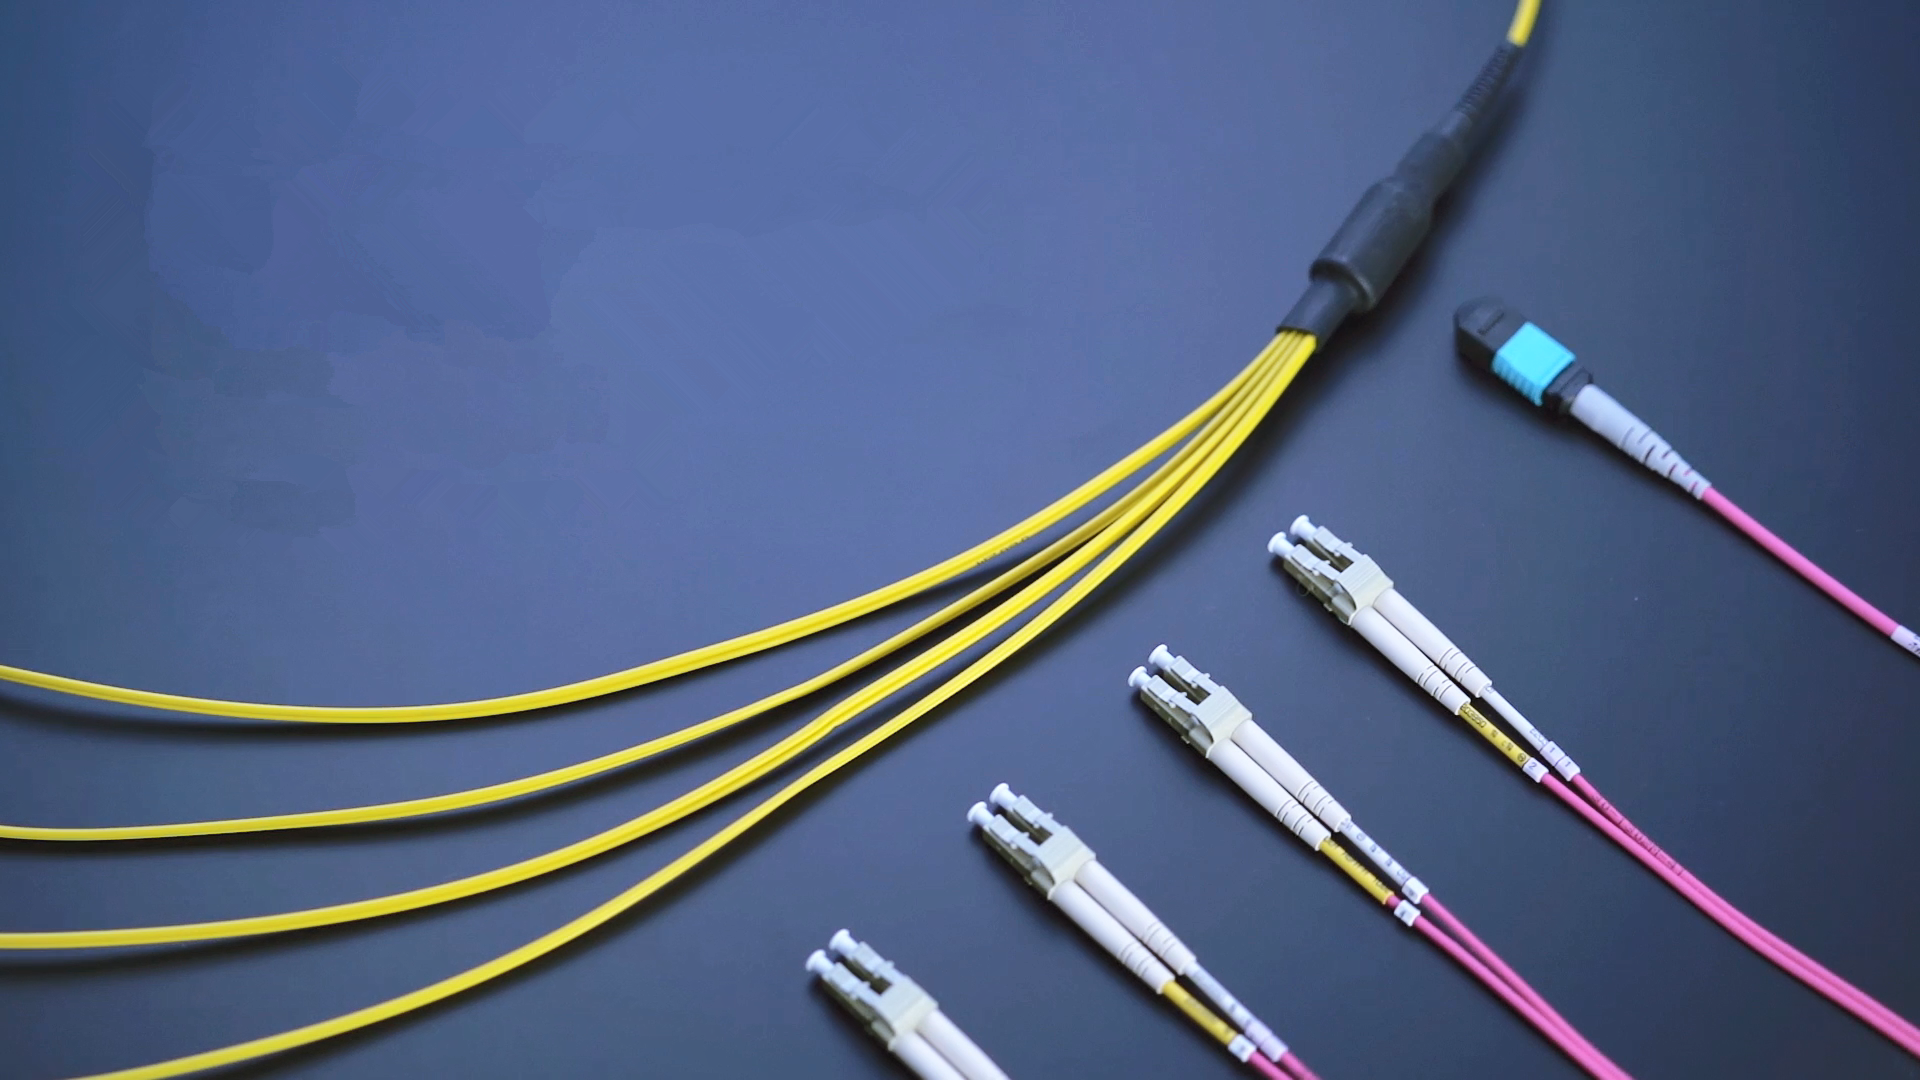 MTP/MPO harness cable